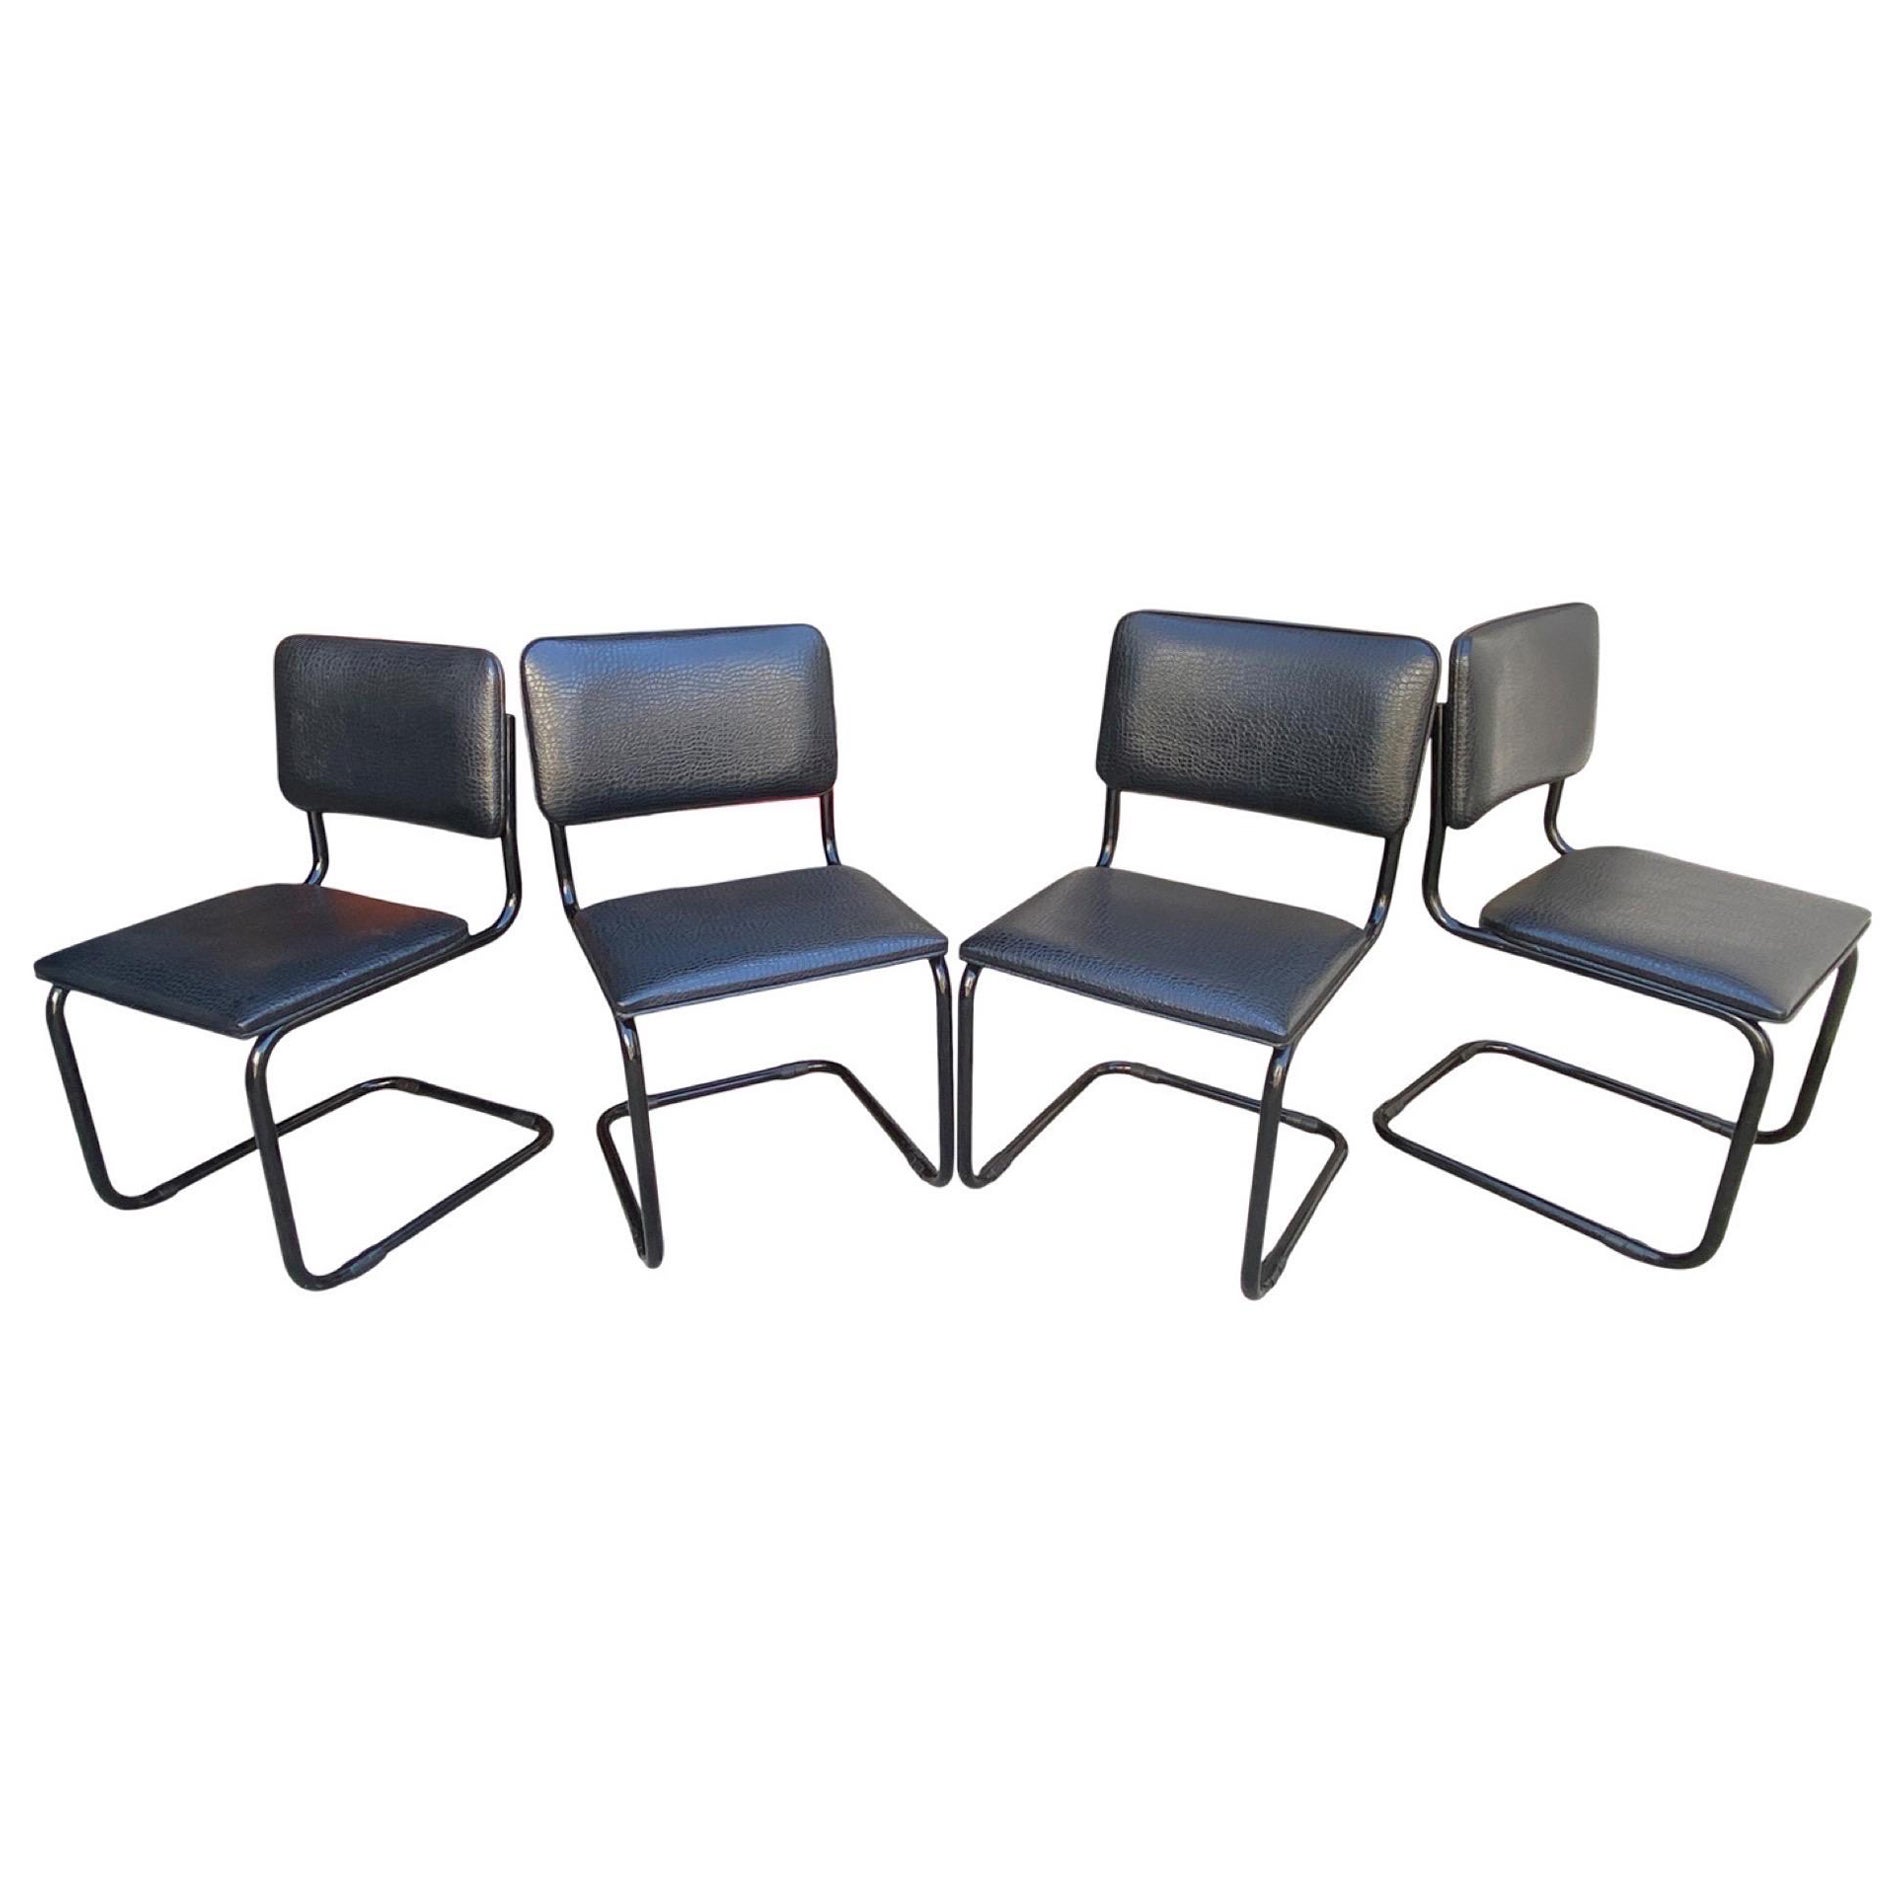 1980s Postmodern Faux Alligator Cantilever Dining Chairs Set of 4 For Sale